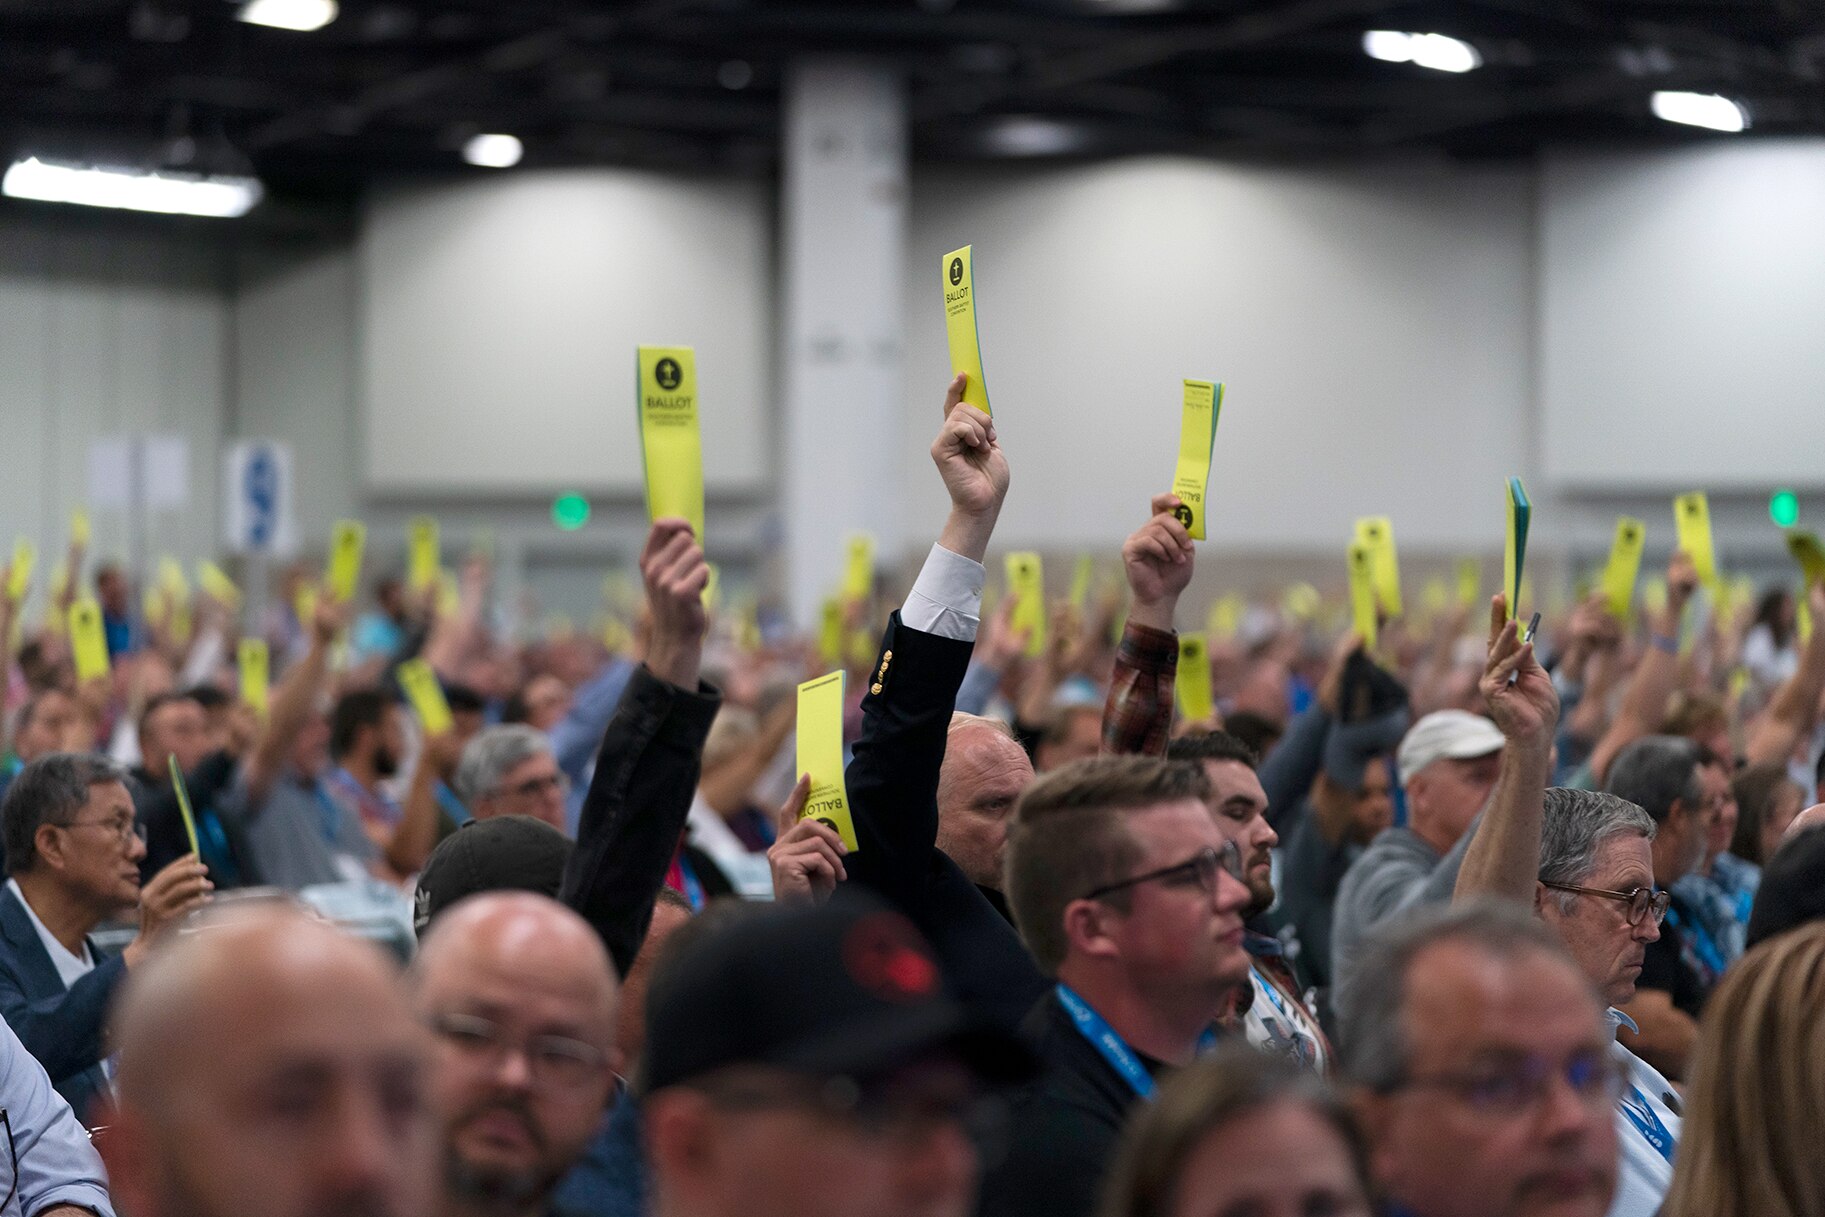 Attendees hold up their ballots during a session at the Southern Baptist Convention's annual meeting